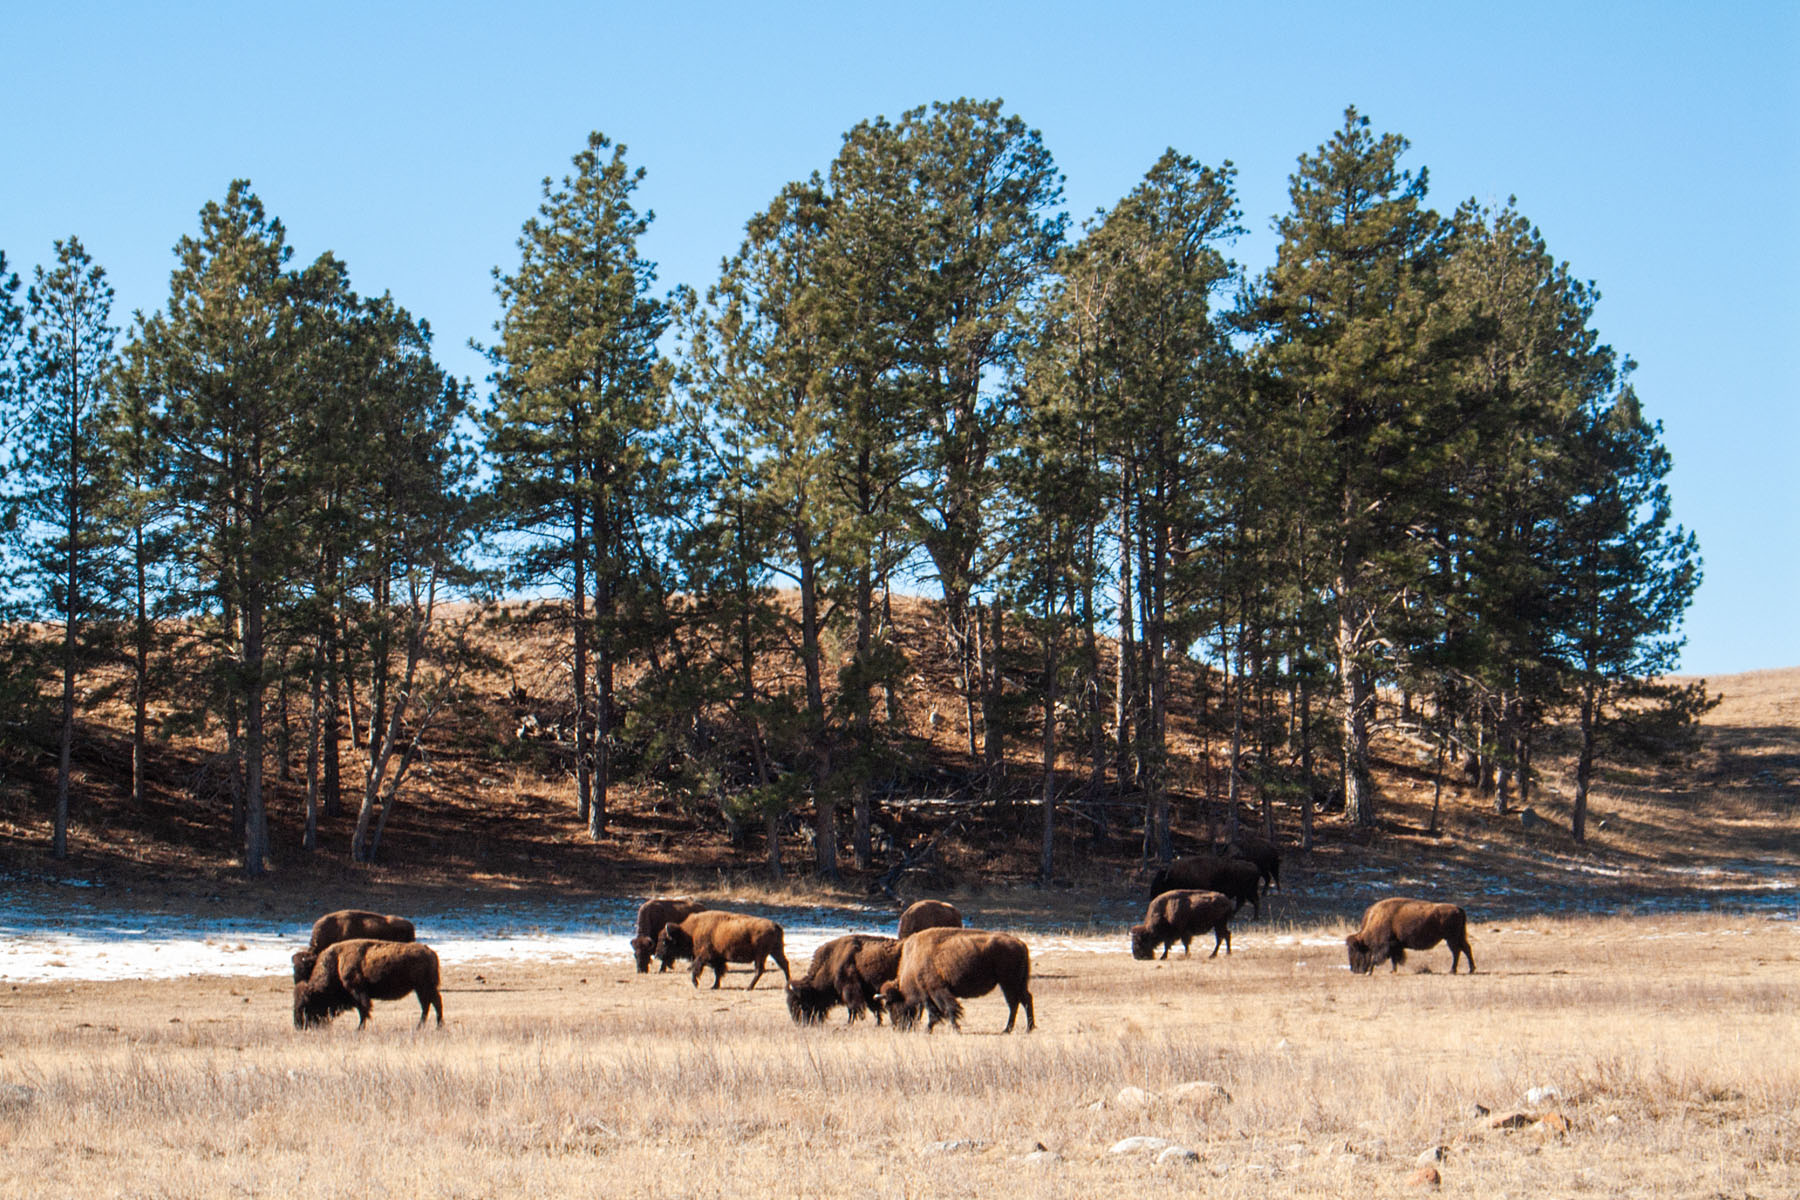 Bison, Custer State Park, South Dakota.  Click for next photo.